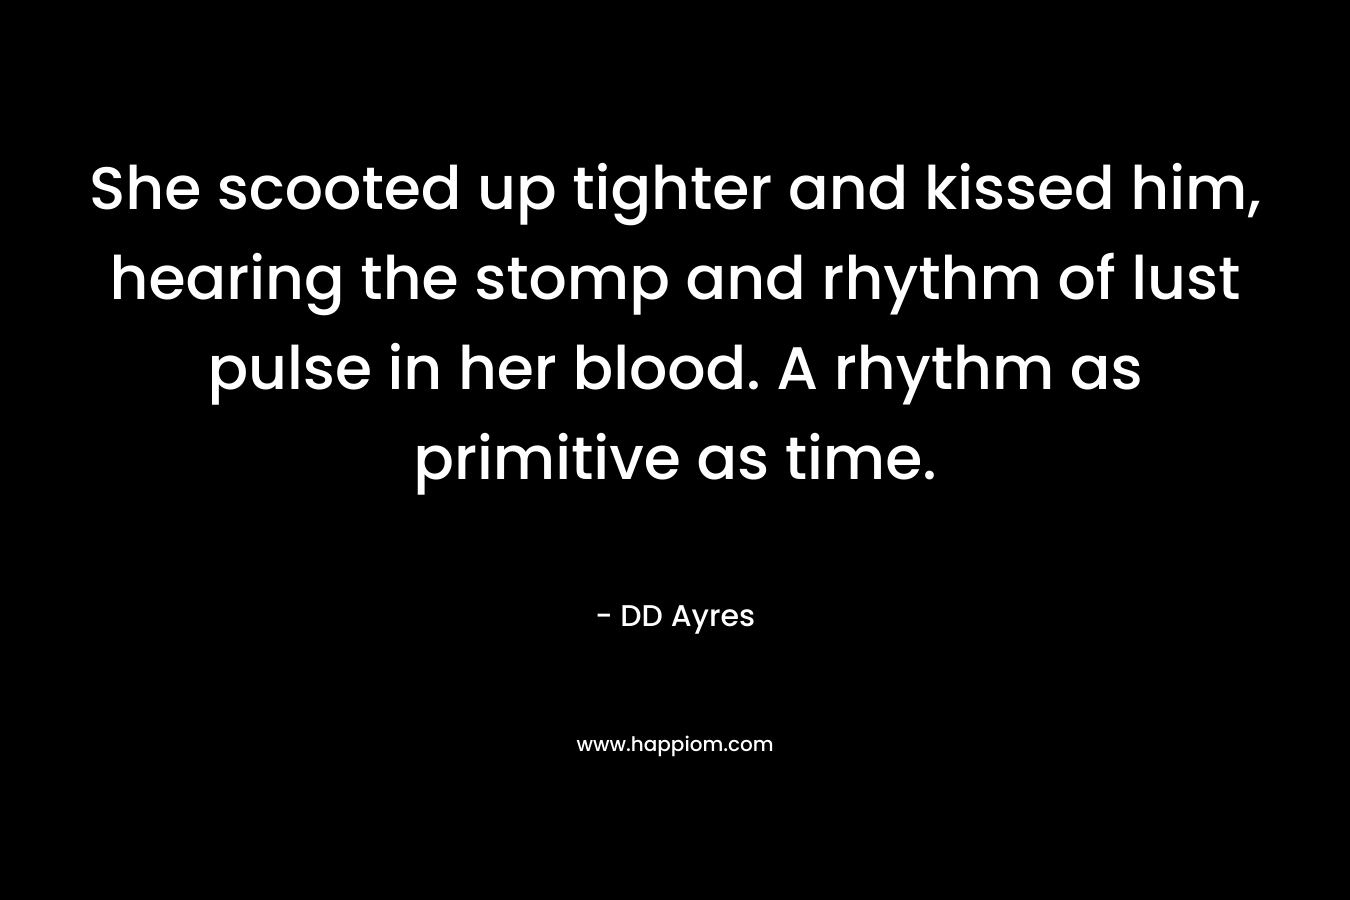 She scooted up tighter and kissed him, hearing the stomp and rhythm of lust pulse in her blood. A rhythm as primitive as time. – DD Ayres